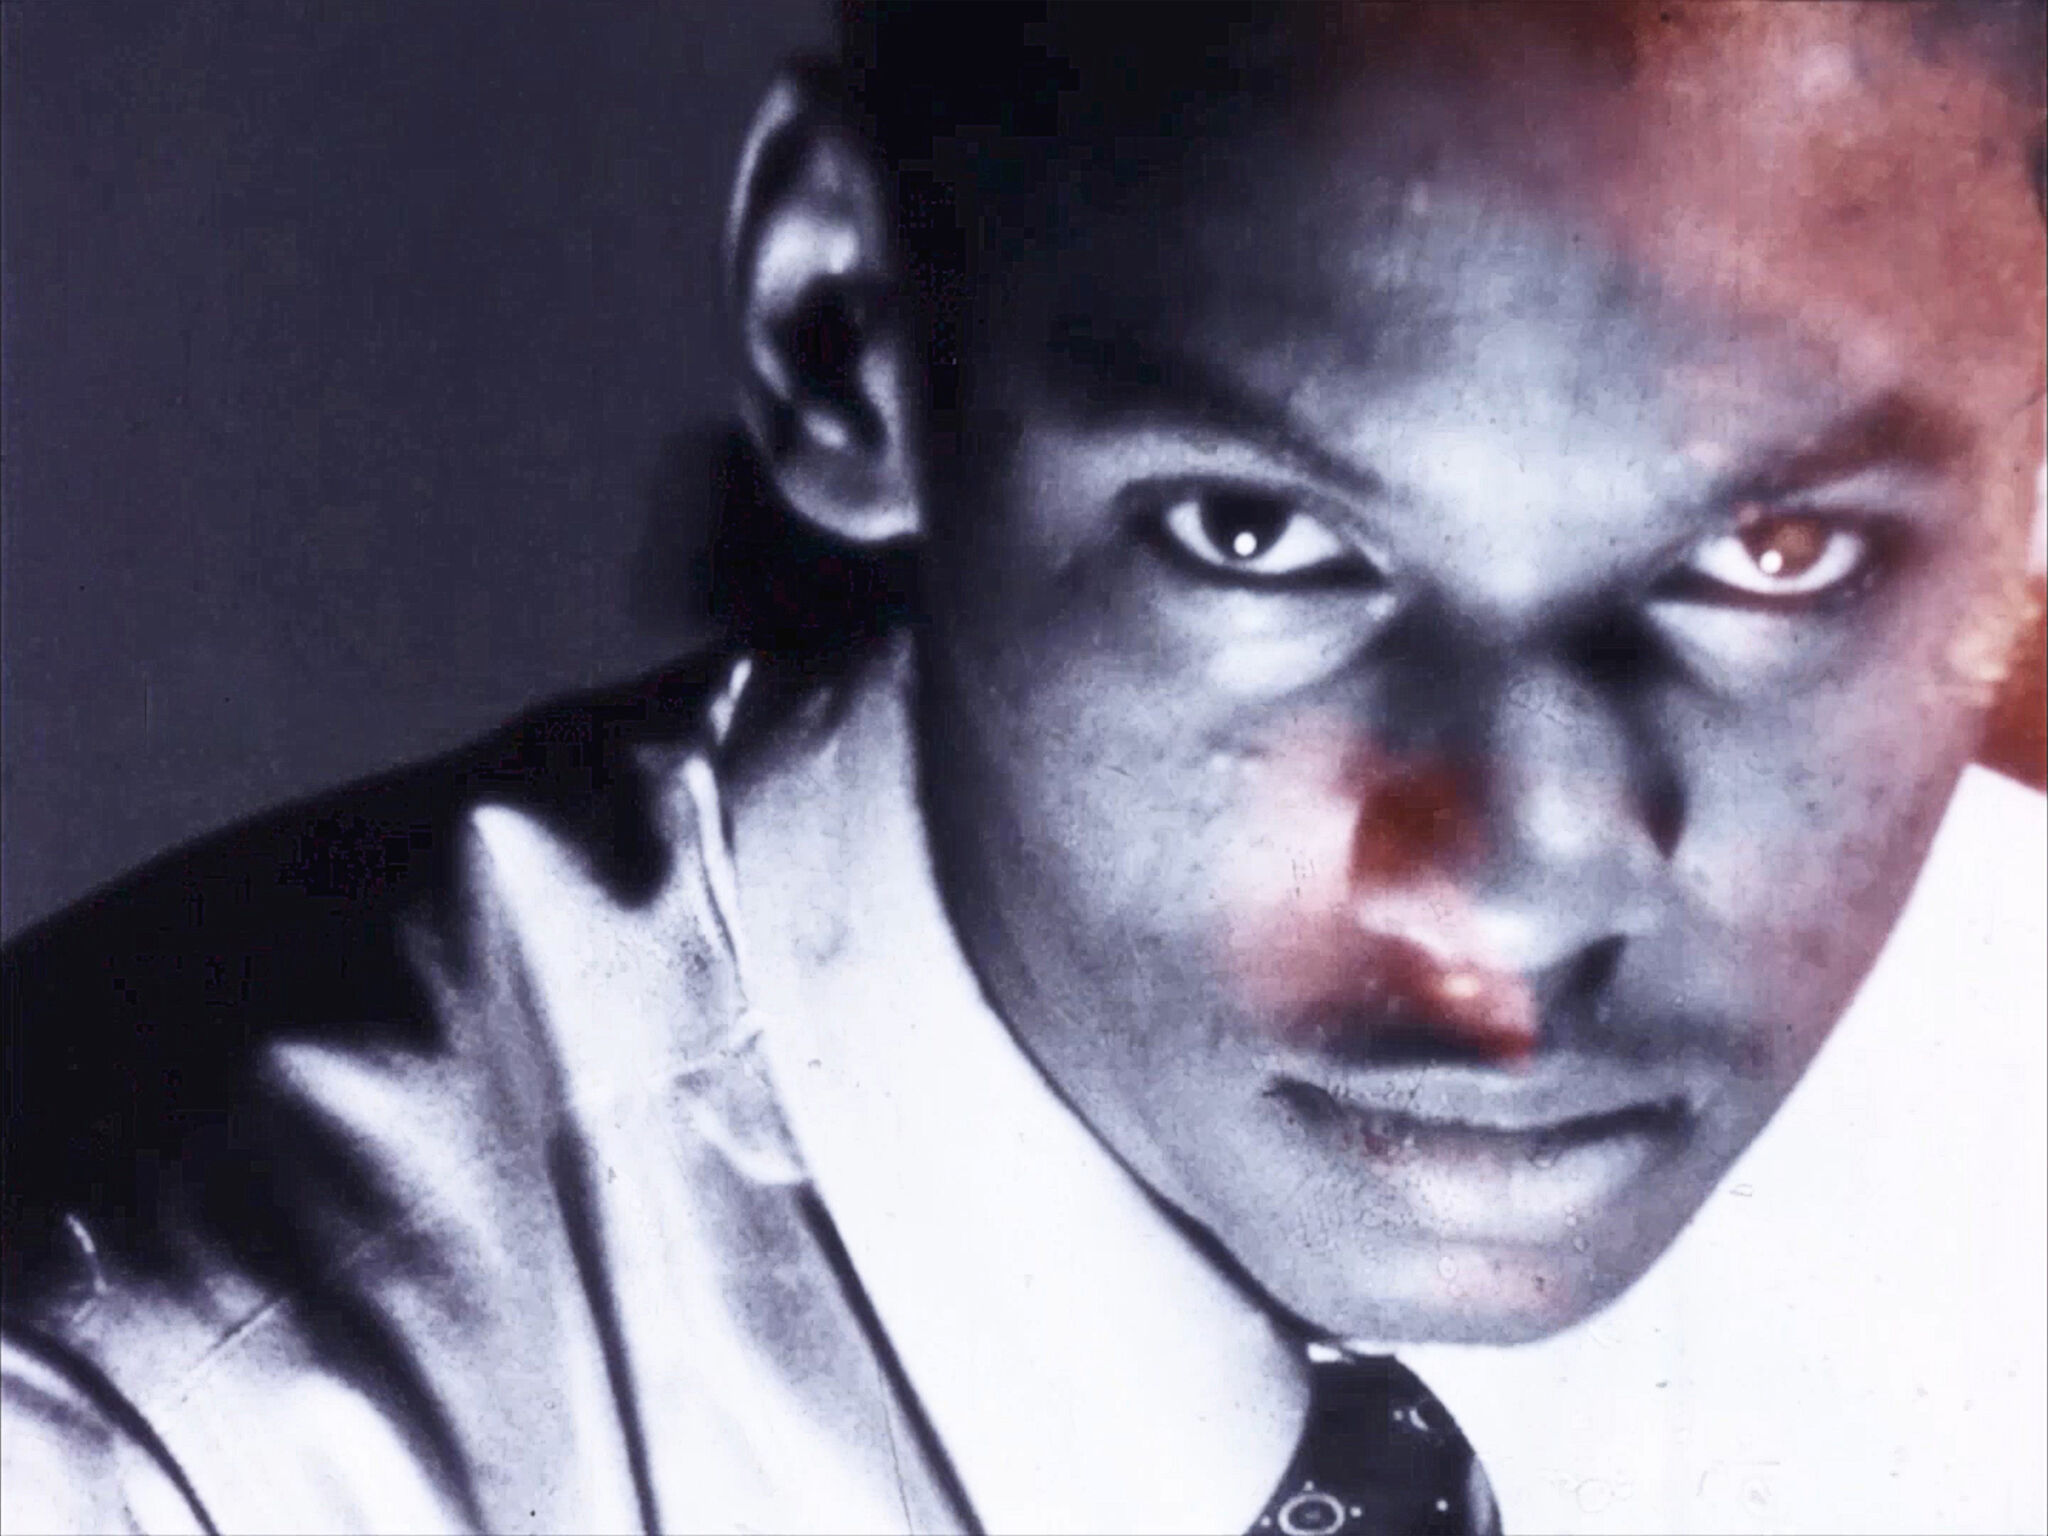 Close-up of a man with intense gaze, wearing a shirt and tie, with a shadowy, reddish overlay.